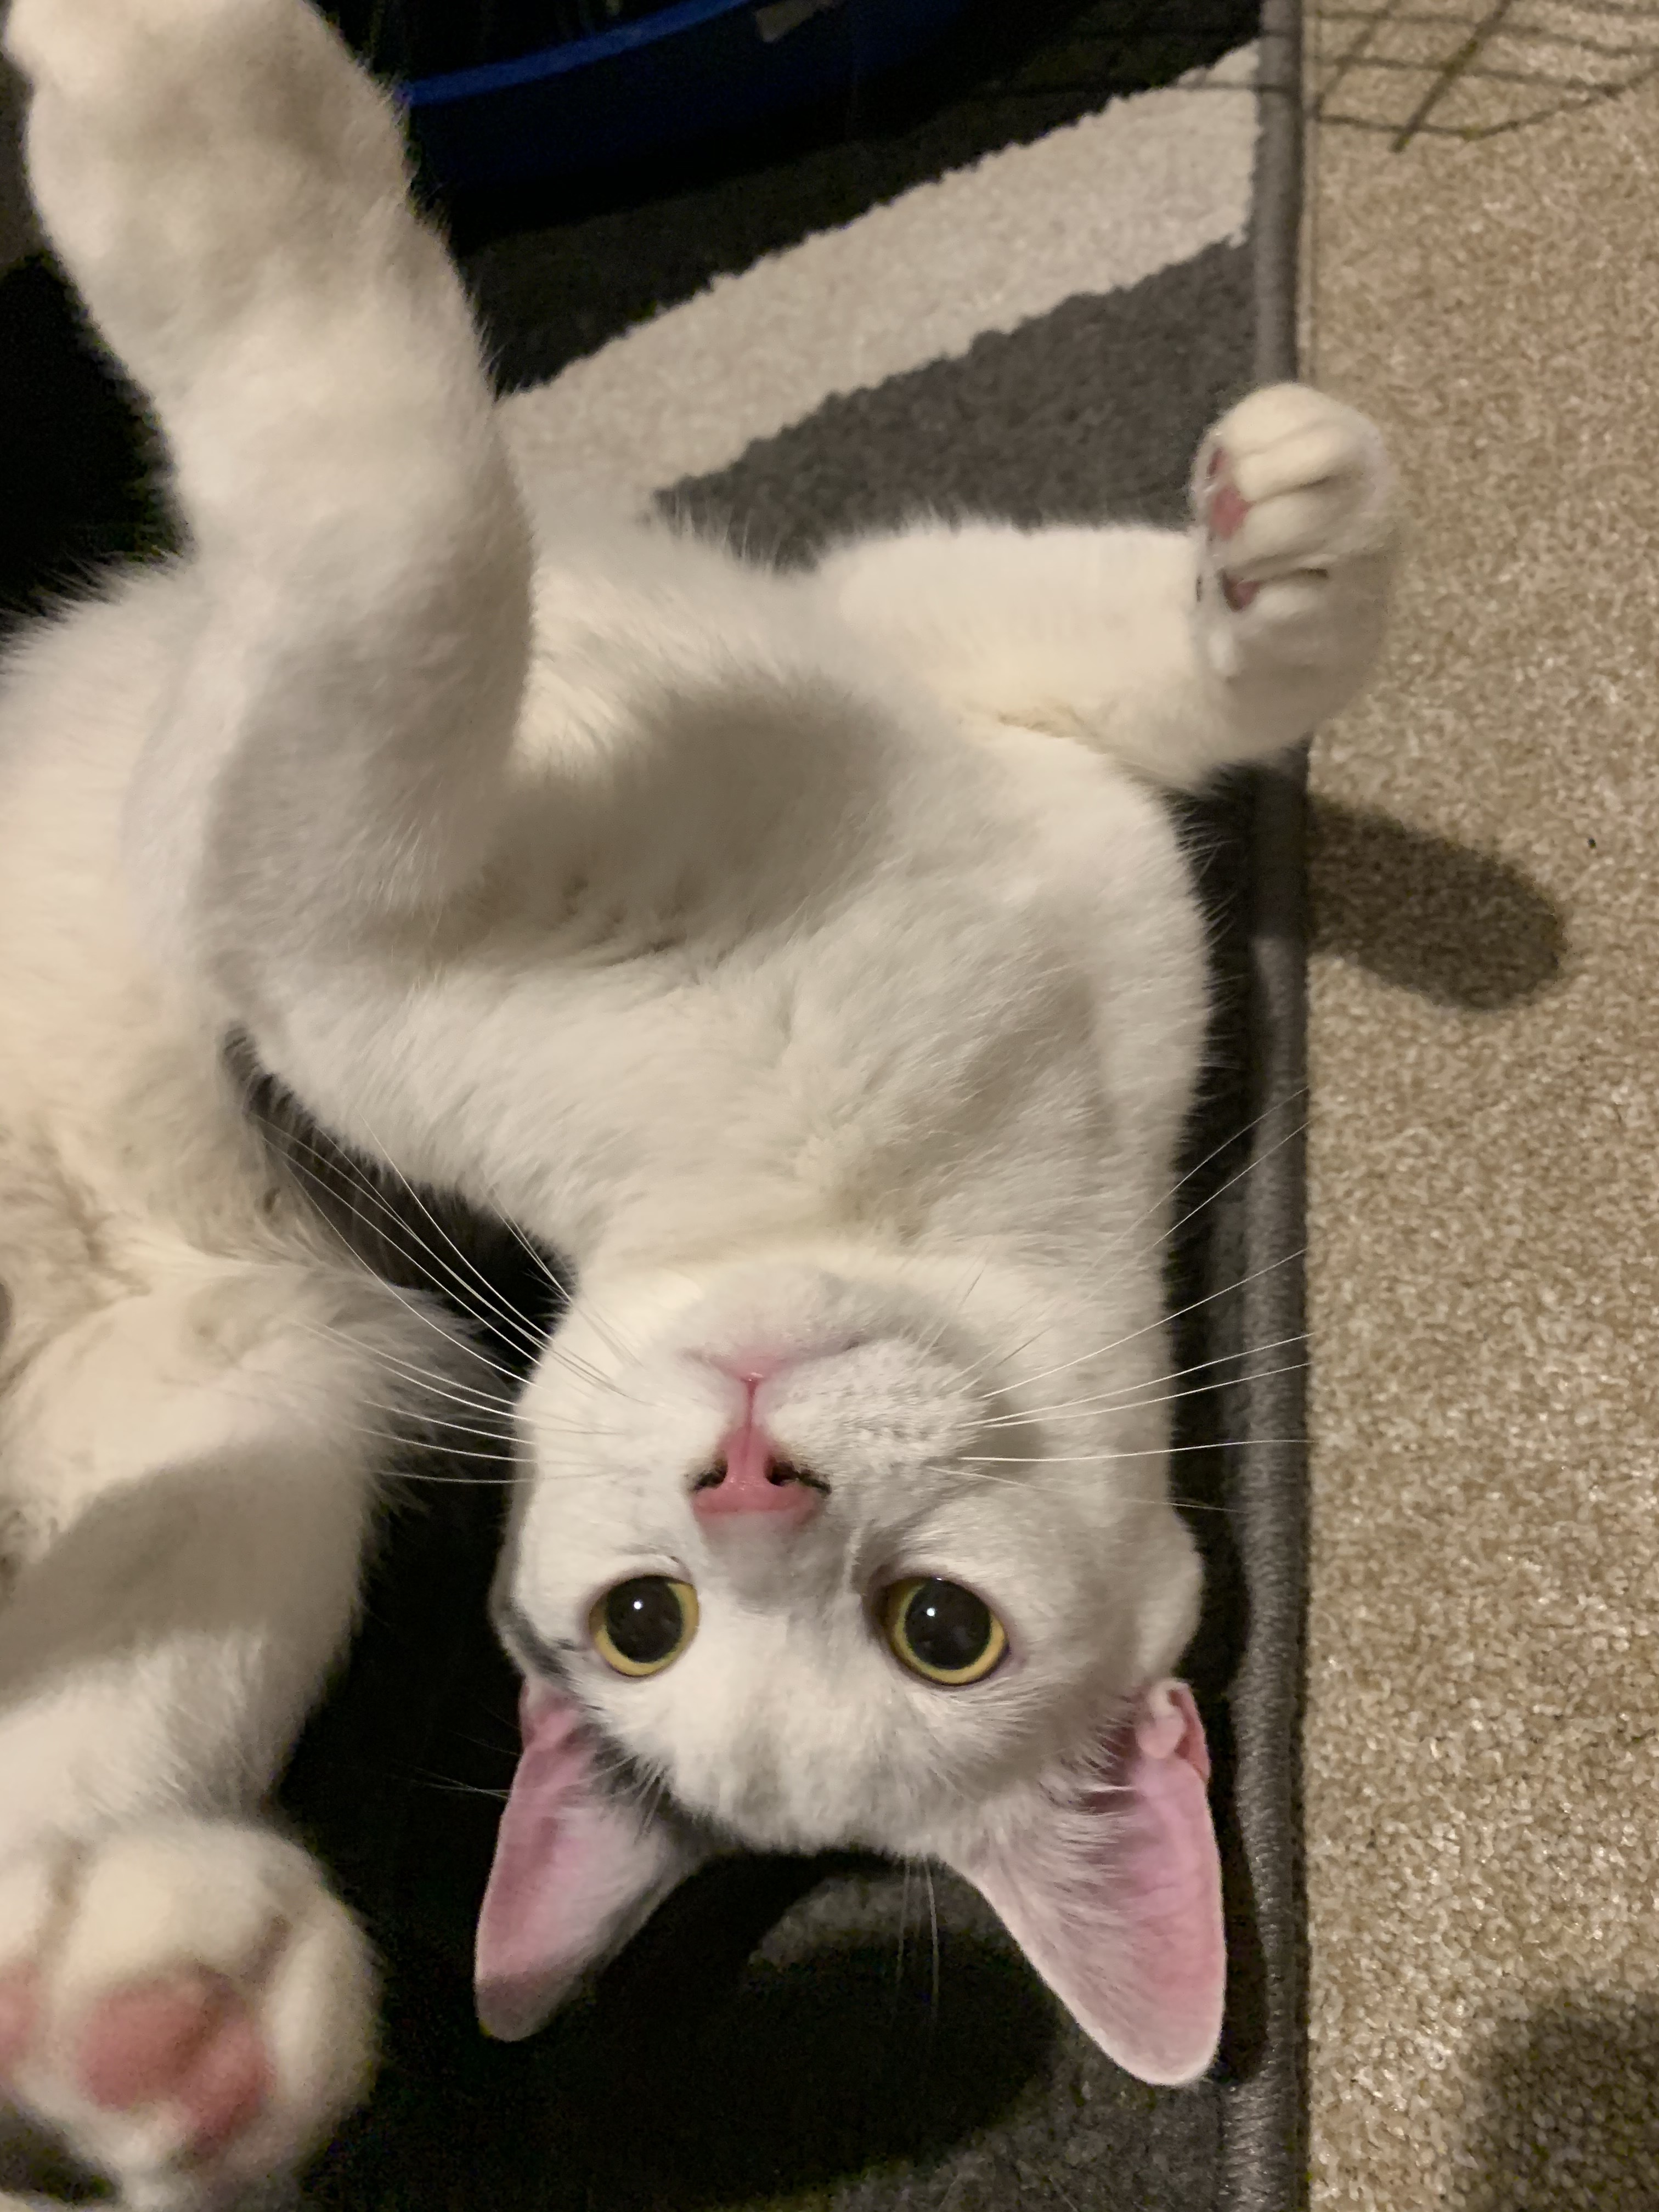 My new cat squid being silly